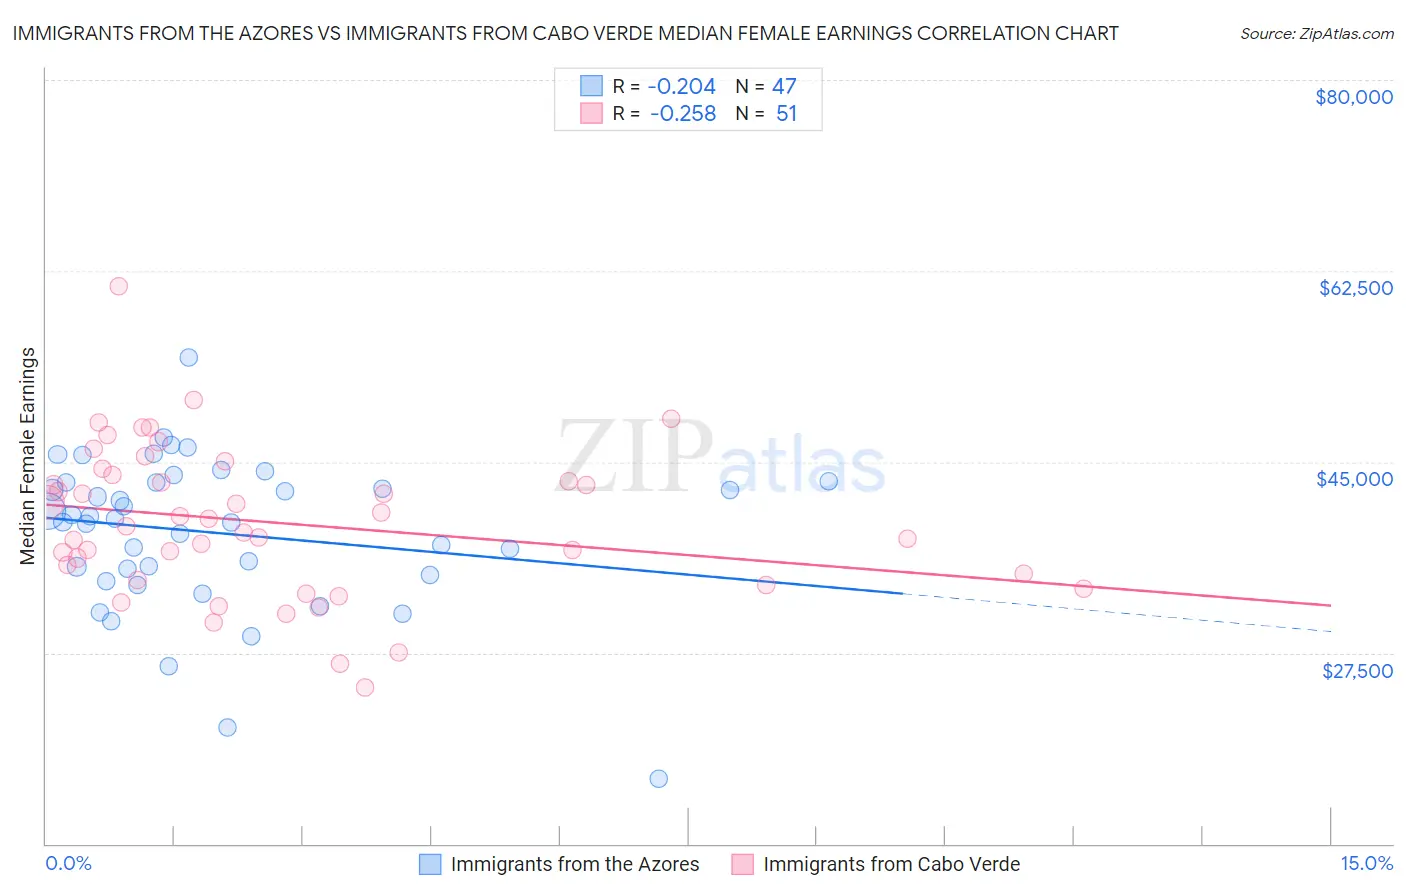 Immigrants from the Azores vs Immigrants from Cabo Verde Median Female Earnings